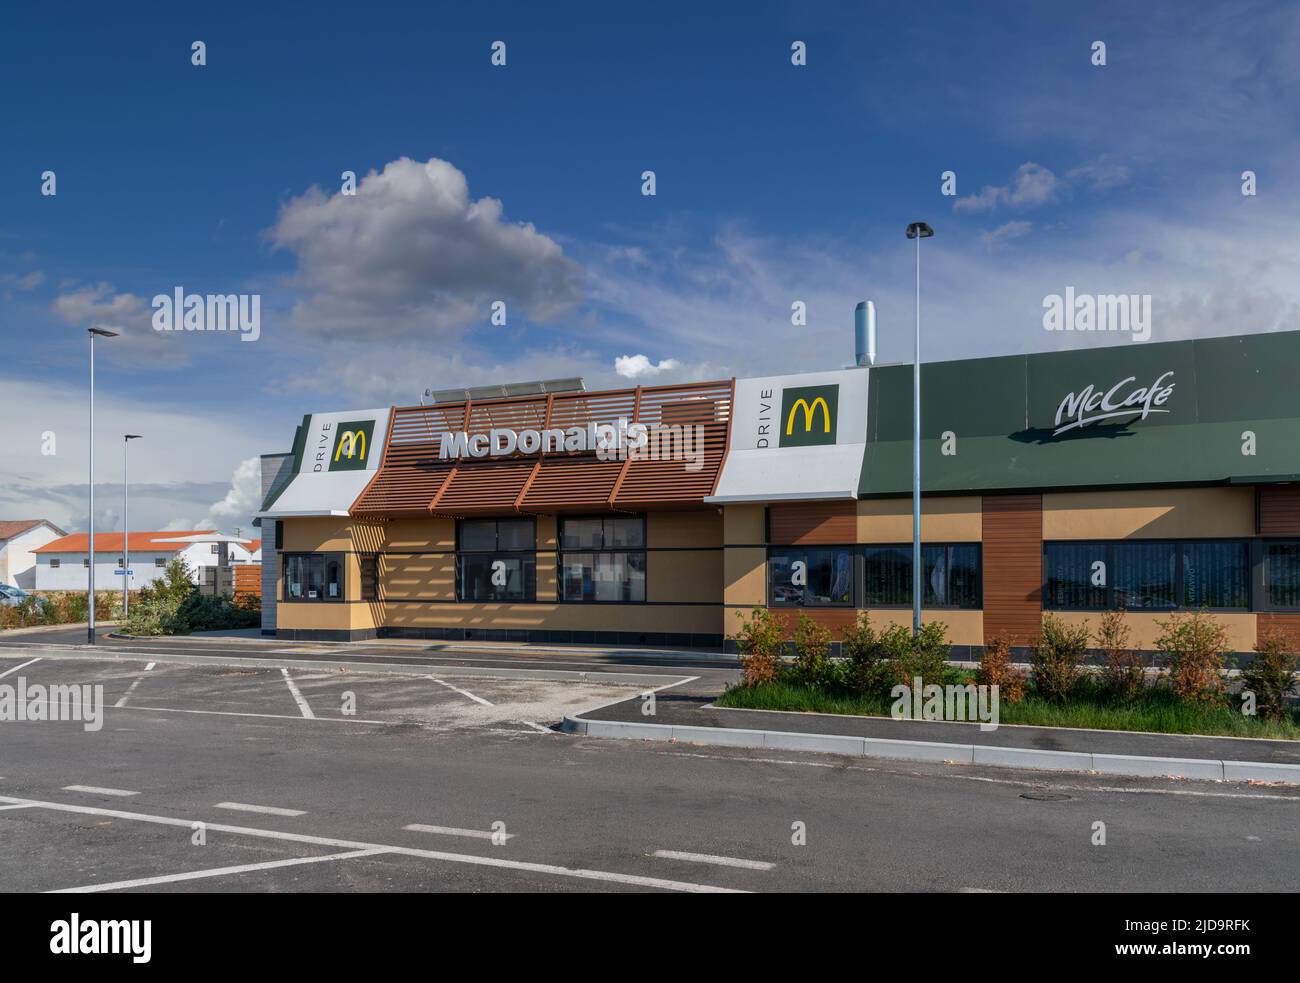 Savigliano, Italy - June 16, 2022: McDonald's restaurant with Mc Drive on cloudy blue sky. The McDonald's Corporation is world's largest chain of hamb Stock Photo